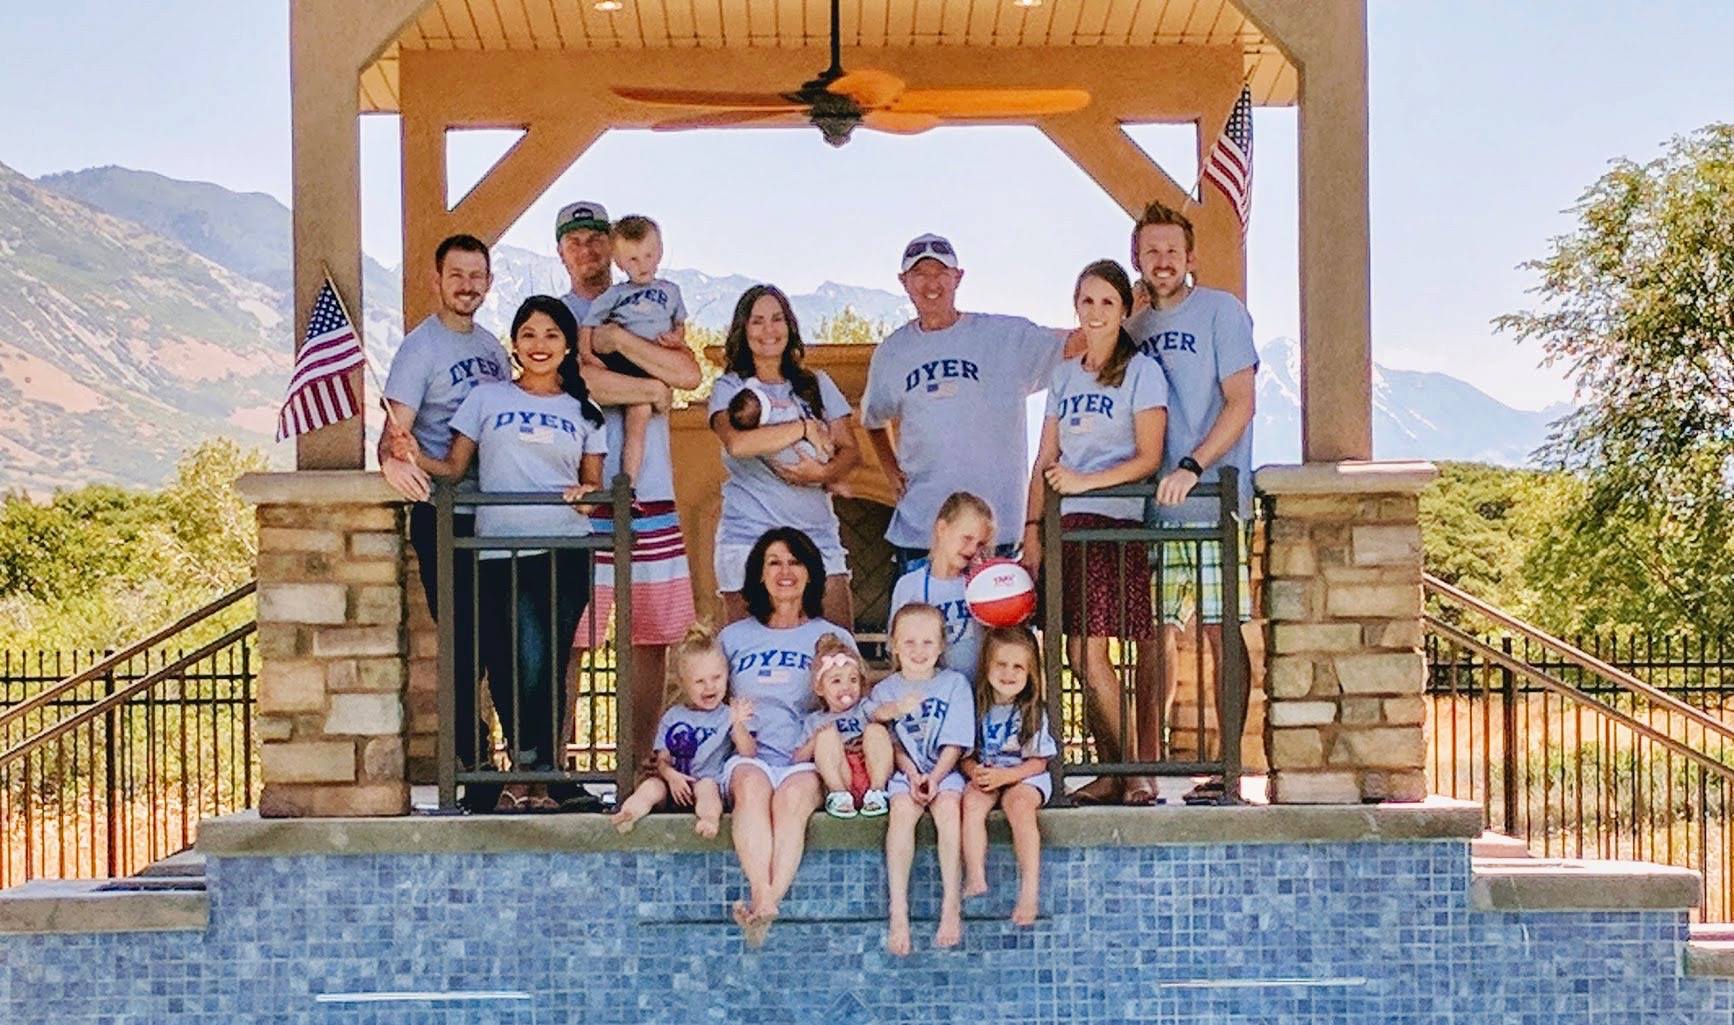 Customer Photo of the Week – the Dyer Family 4th of July